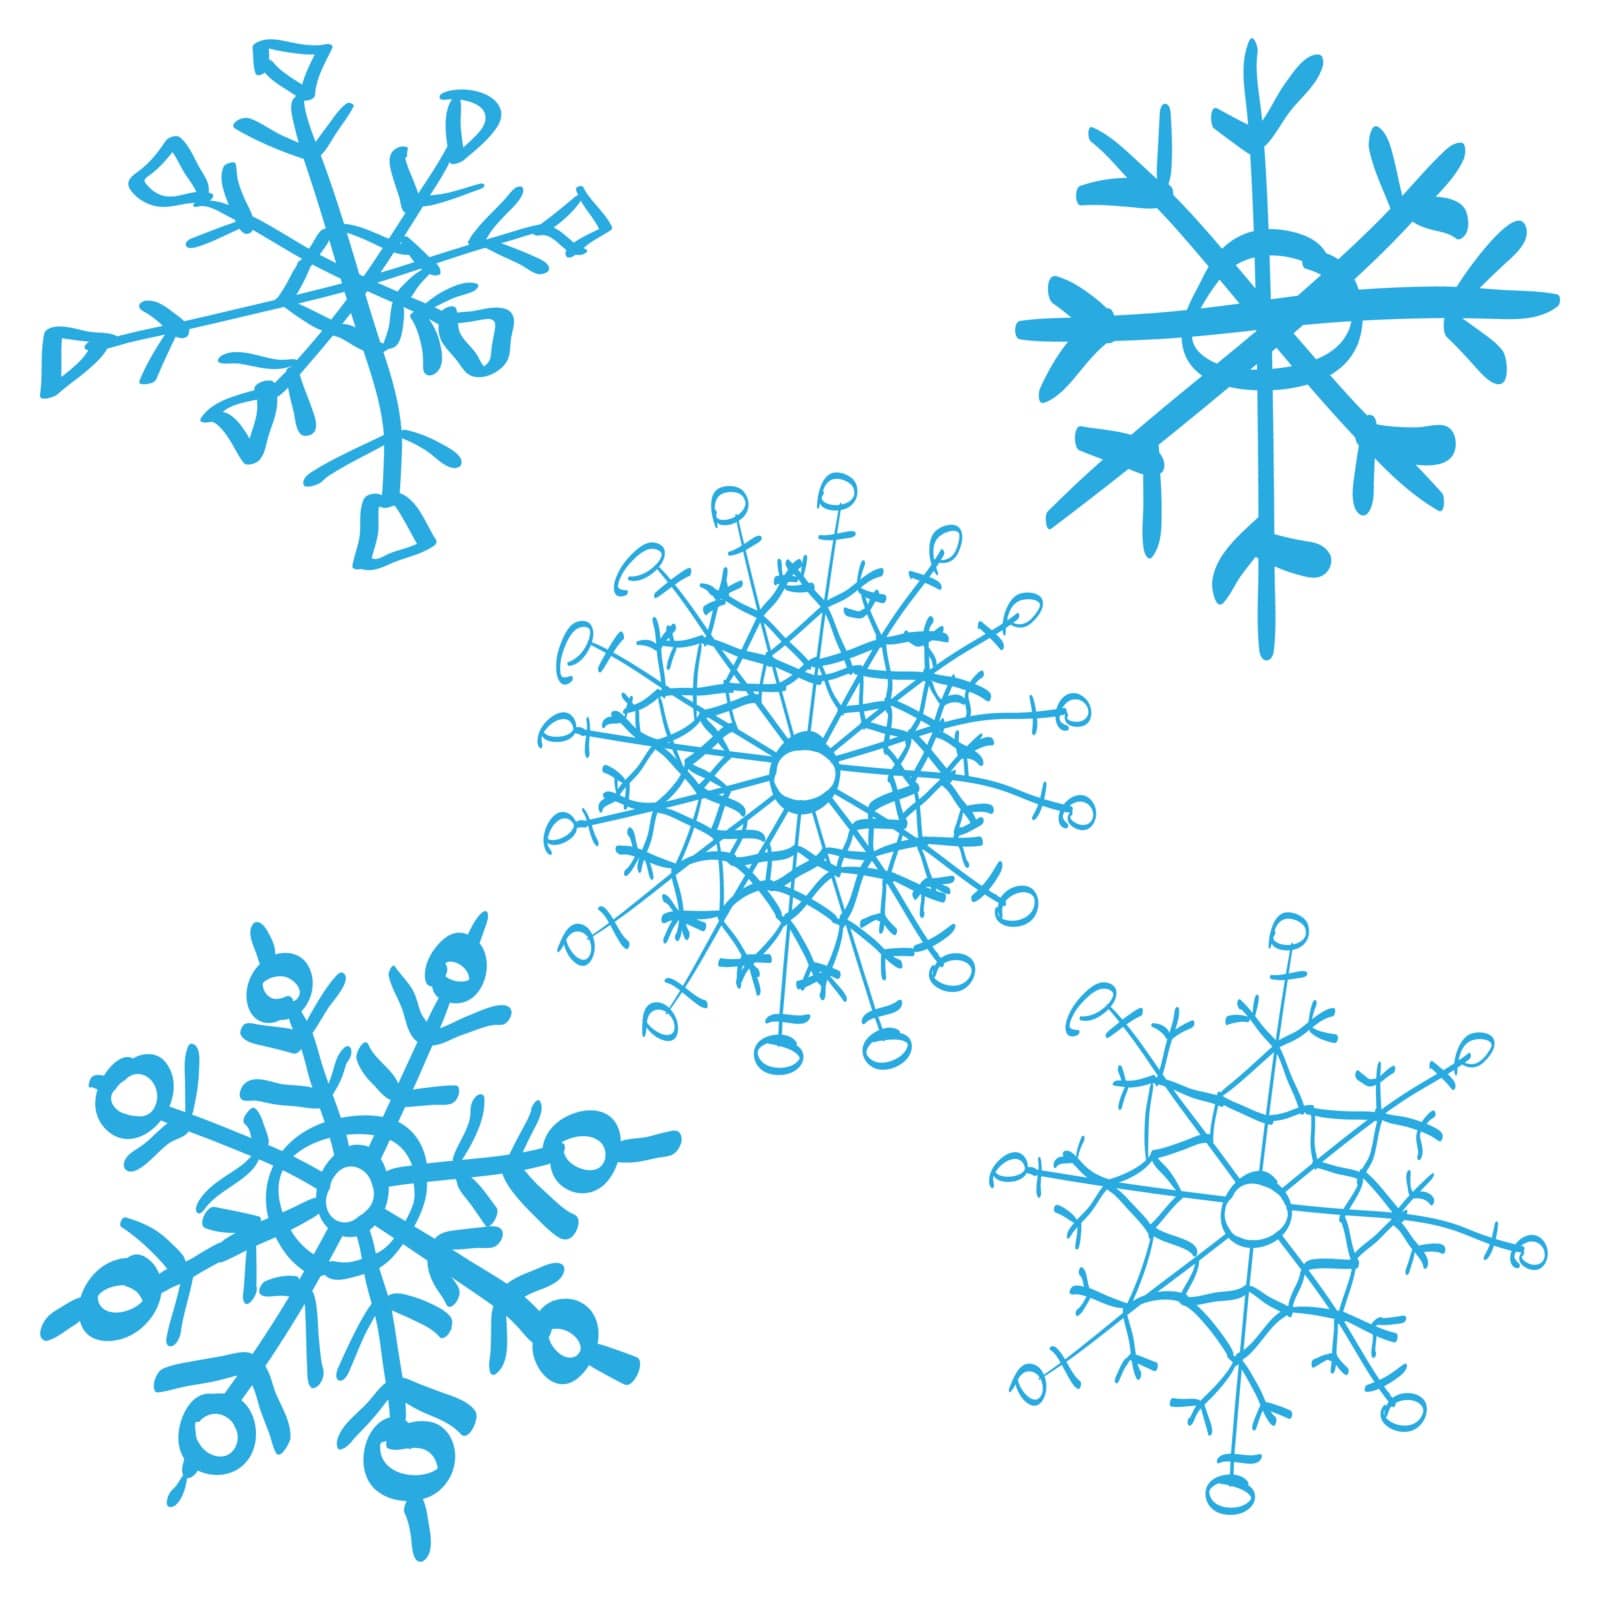 Blue ornate snowflake isolated on white background. Flat icon with christmas and winter theme. Simple snow symbol illustration.